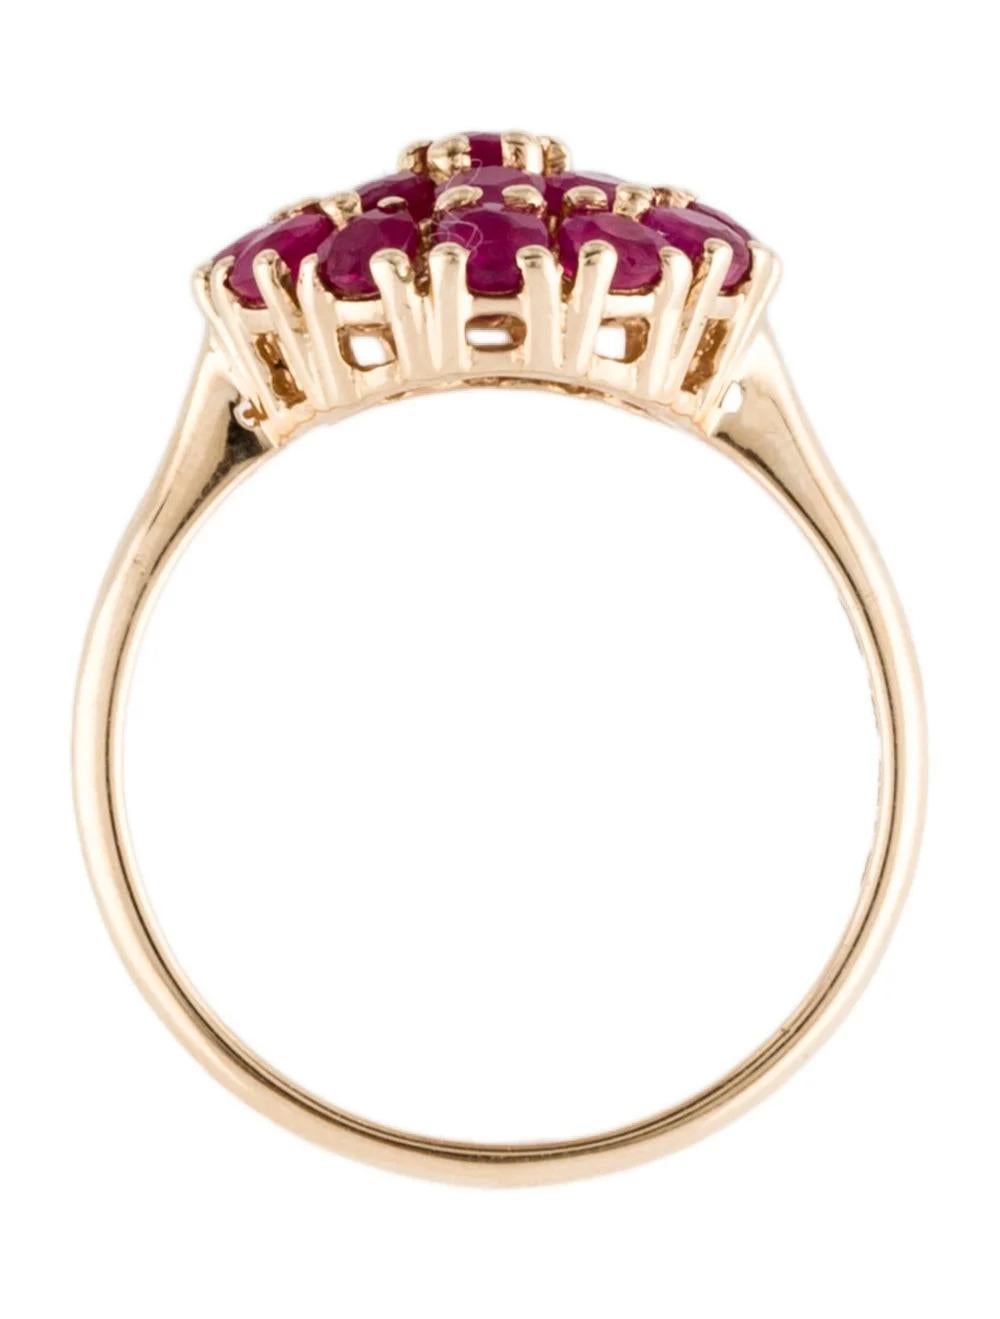 Women's 14K Ruby Cocktail Ring, Size 6.75: Elegant Design with Stunning Gemstone For Sale